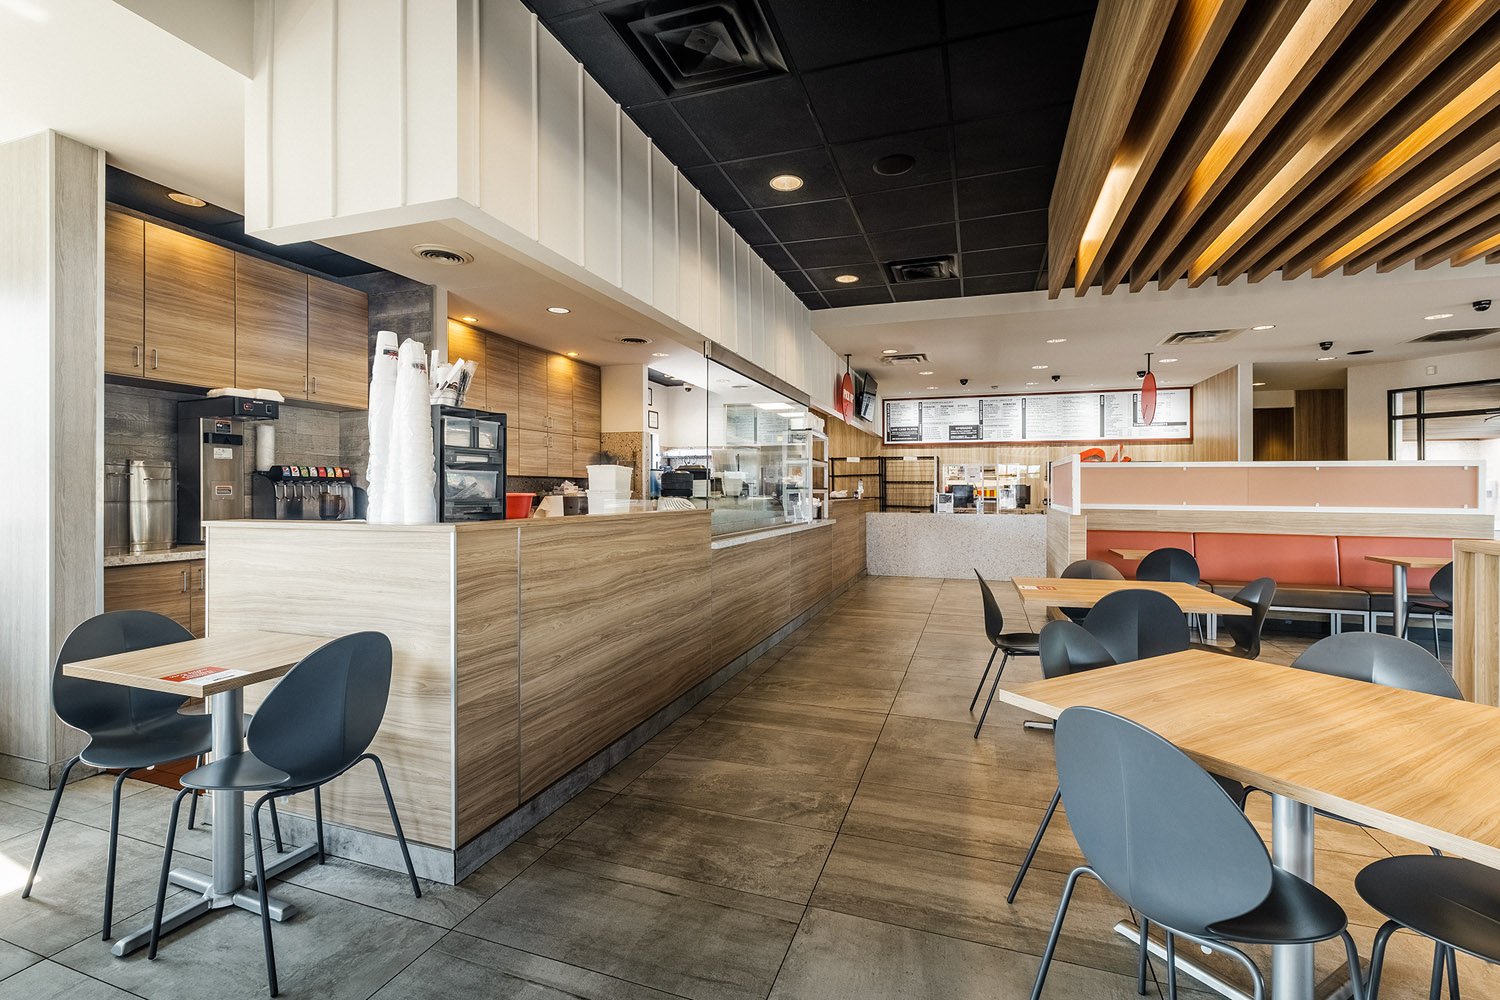 Open concept give restaurant guests views into the kitchen